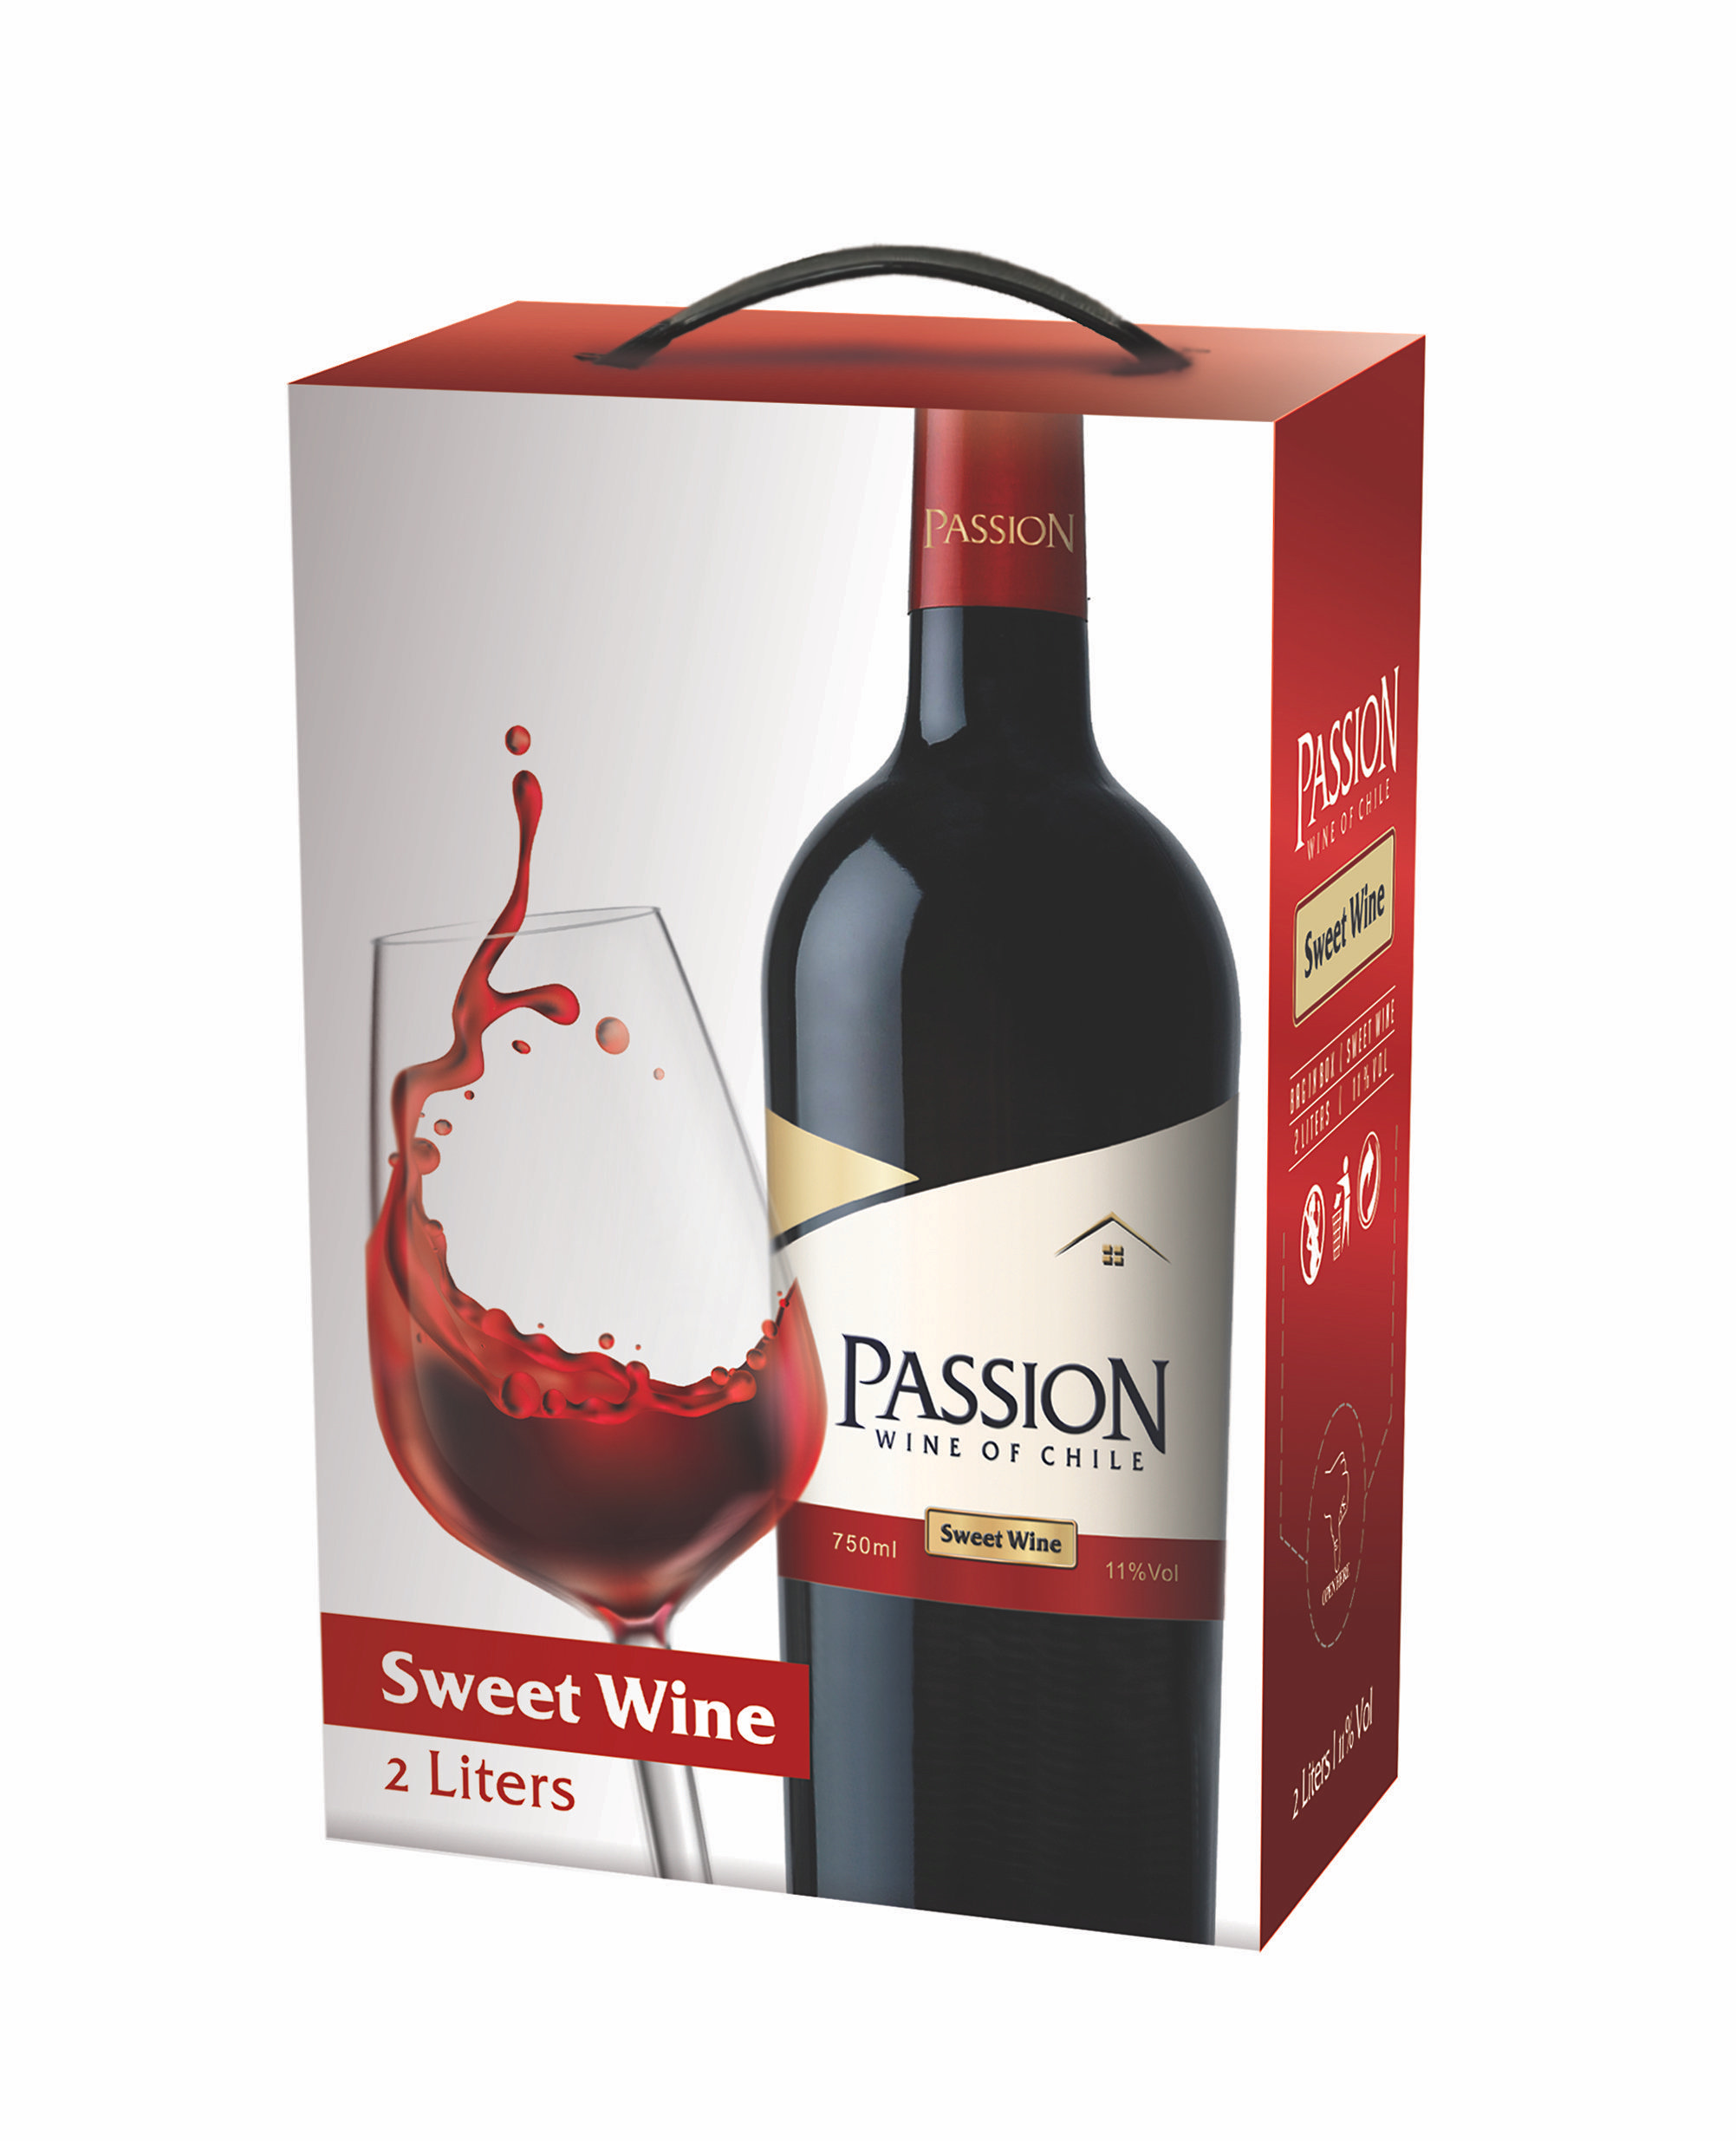 Shopruou247_hinh_anh_Ruou vang Passion Wine den tu Chile